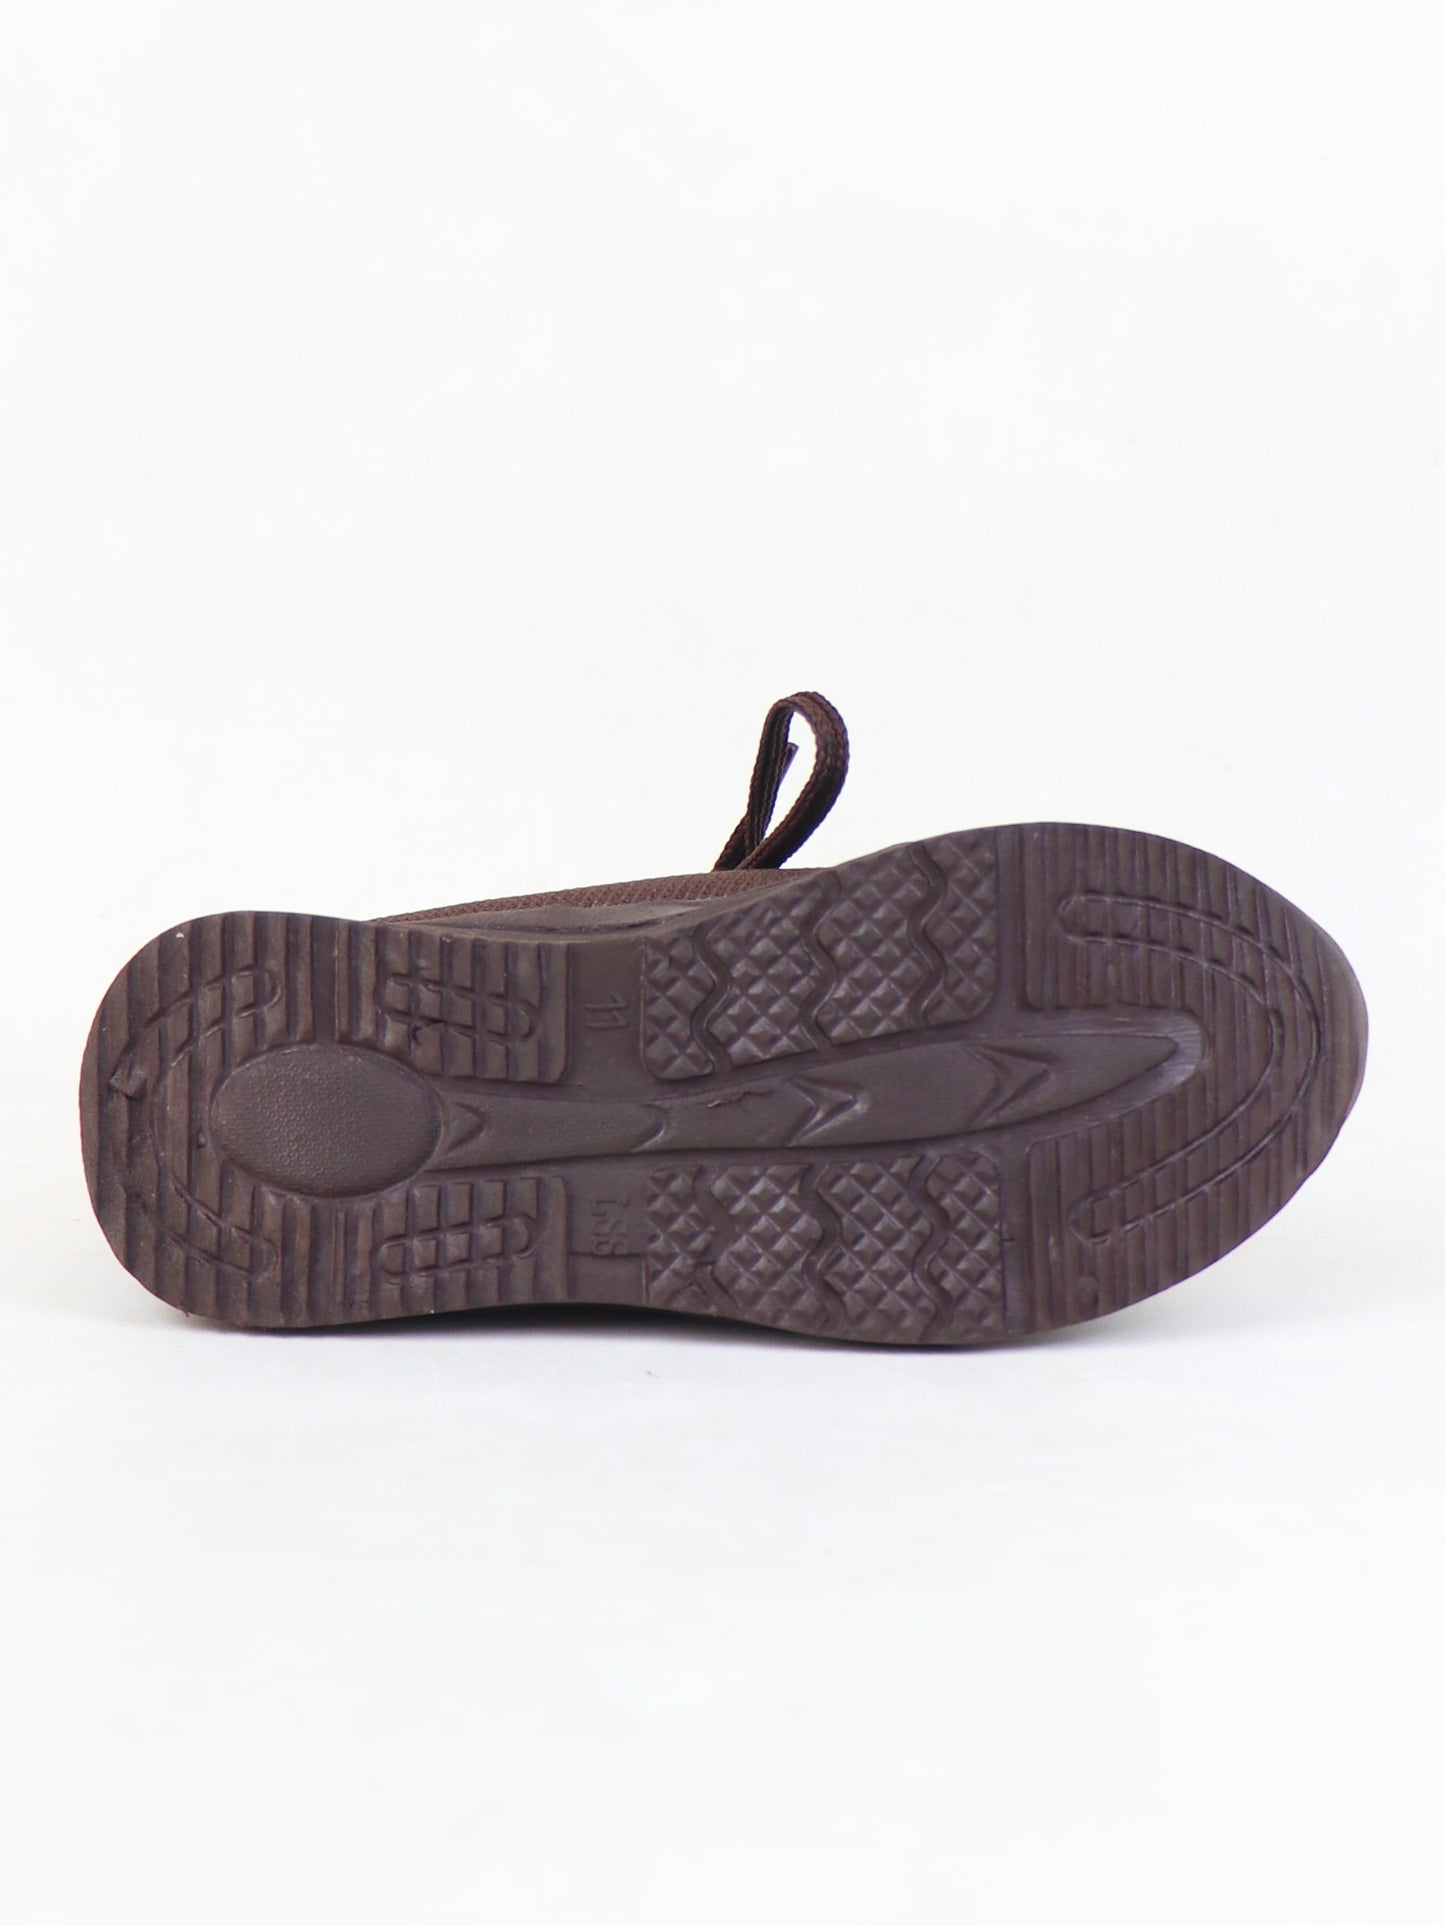 BS50 Boys Lace Shoes 8Yrs - 12Yrs Brown